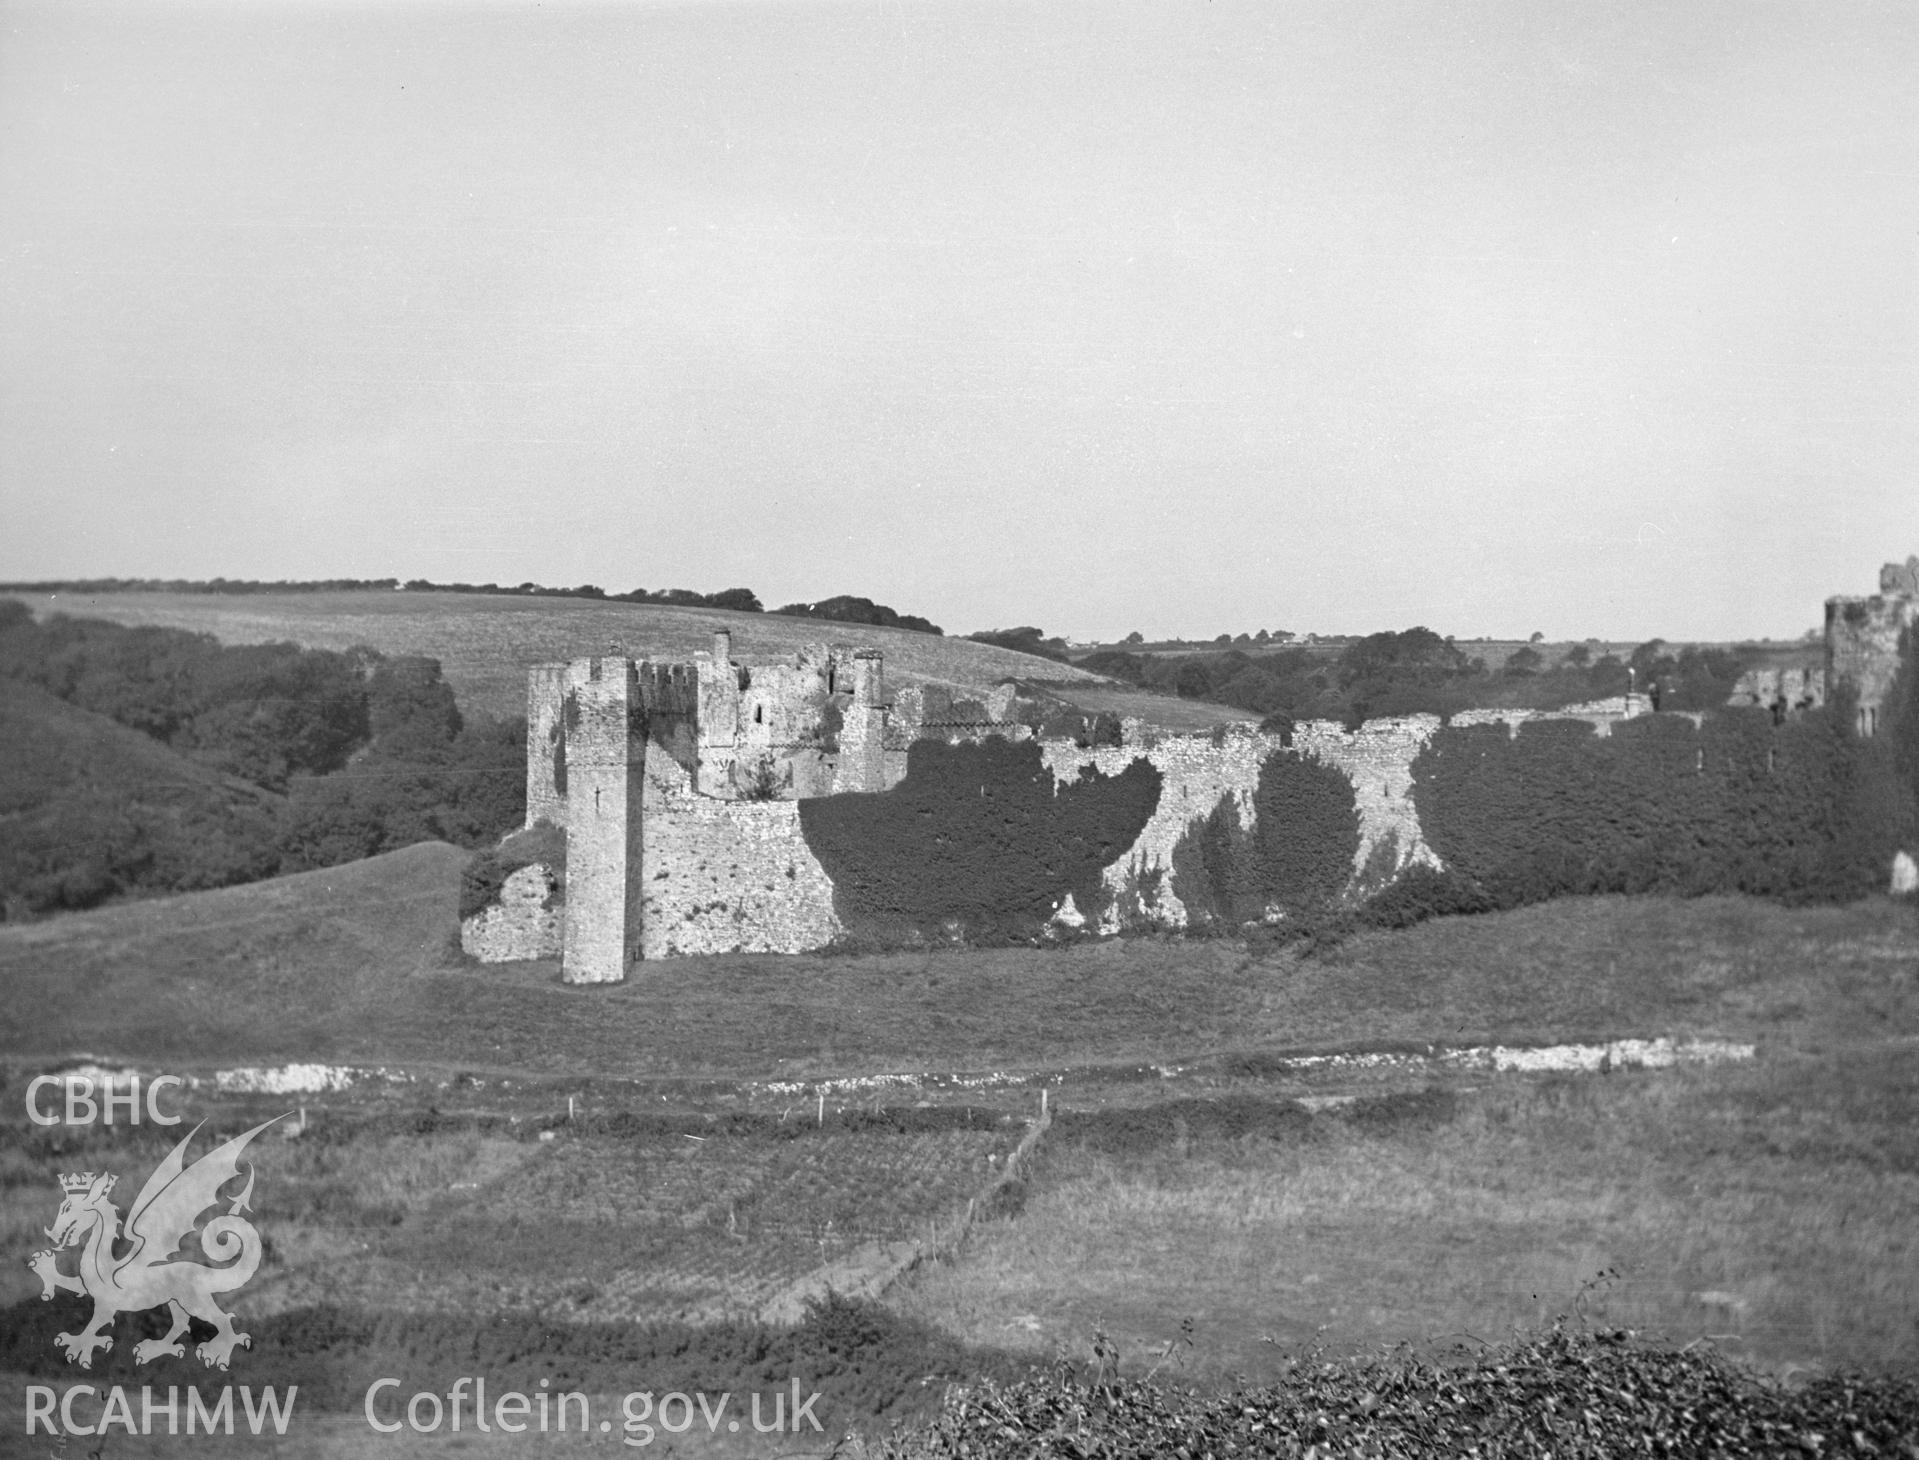 Digital copy of a nitrate negative showing landscape view of Manorbier Castle. From the National Building Record Postcard Collection.